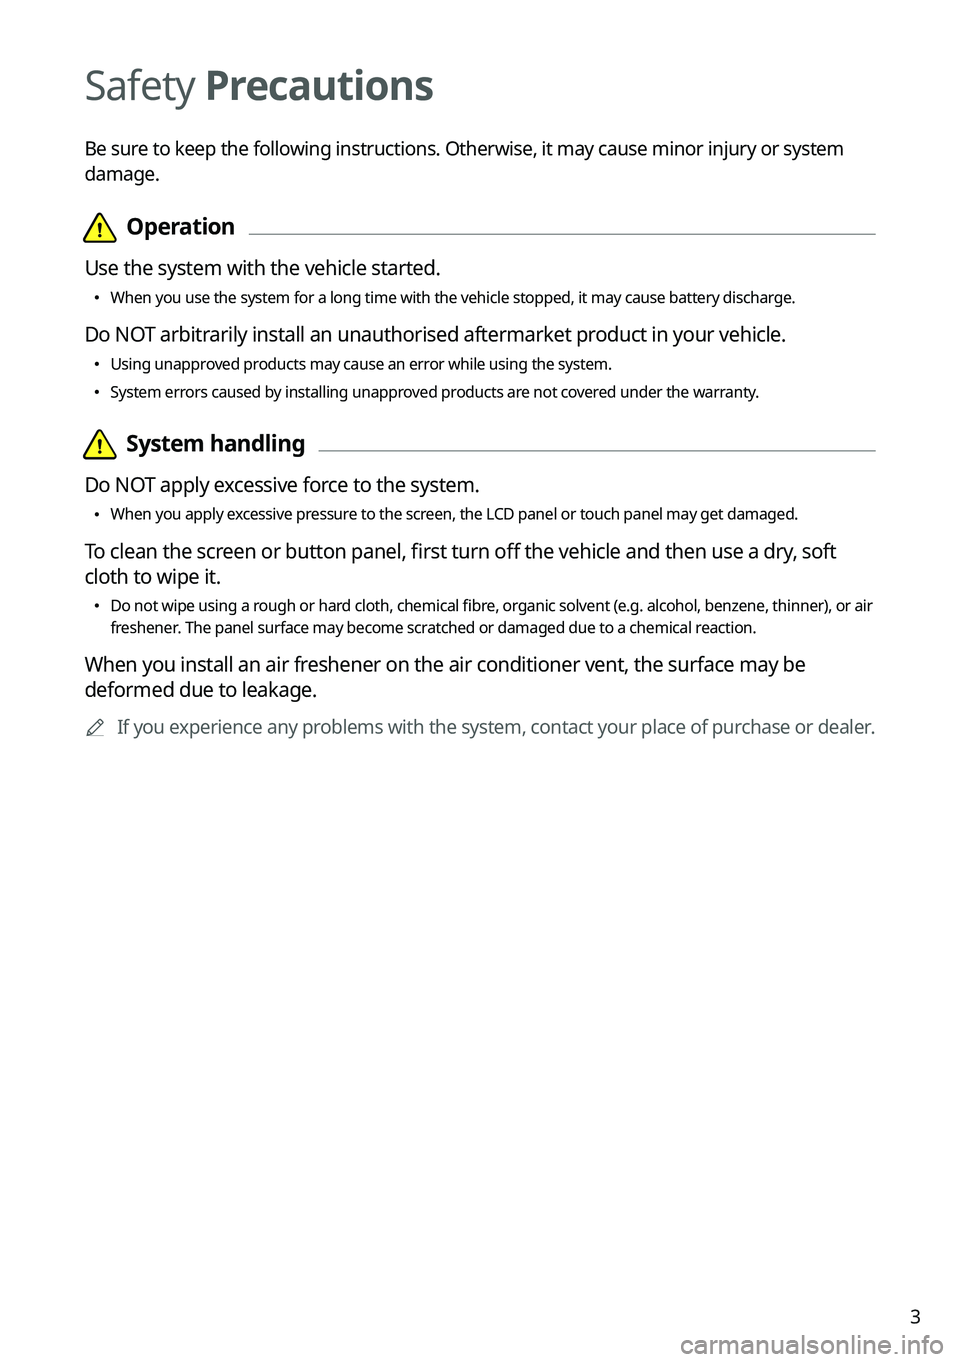 KIA SPORTAGE HYBRID 2023  Navigation System Quick Reference Guide 3
Safety Precautions
Be sure to keep the following instructions. Otherwise, it may cause minor injury or system 
damage. 
  